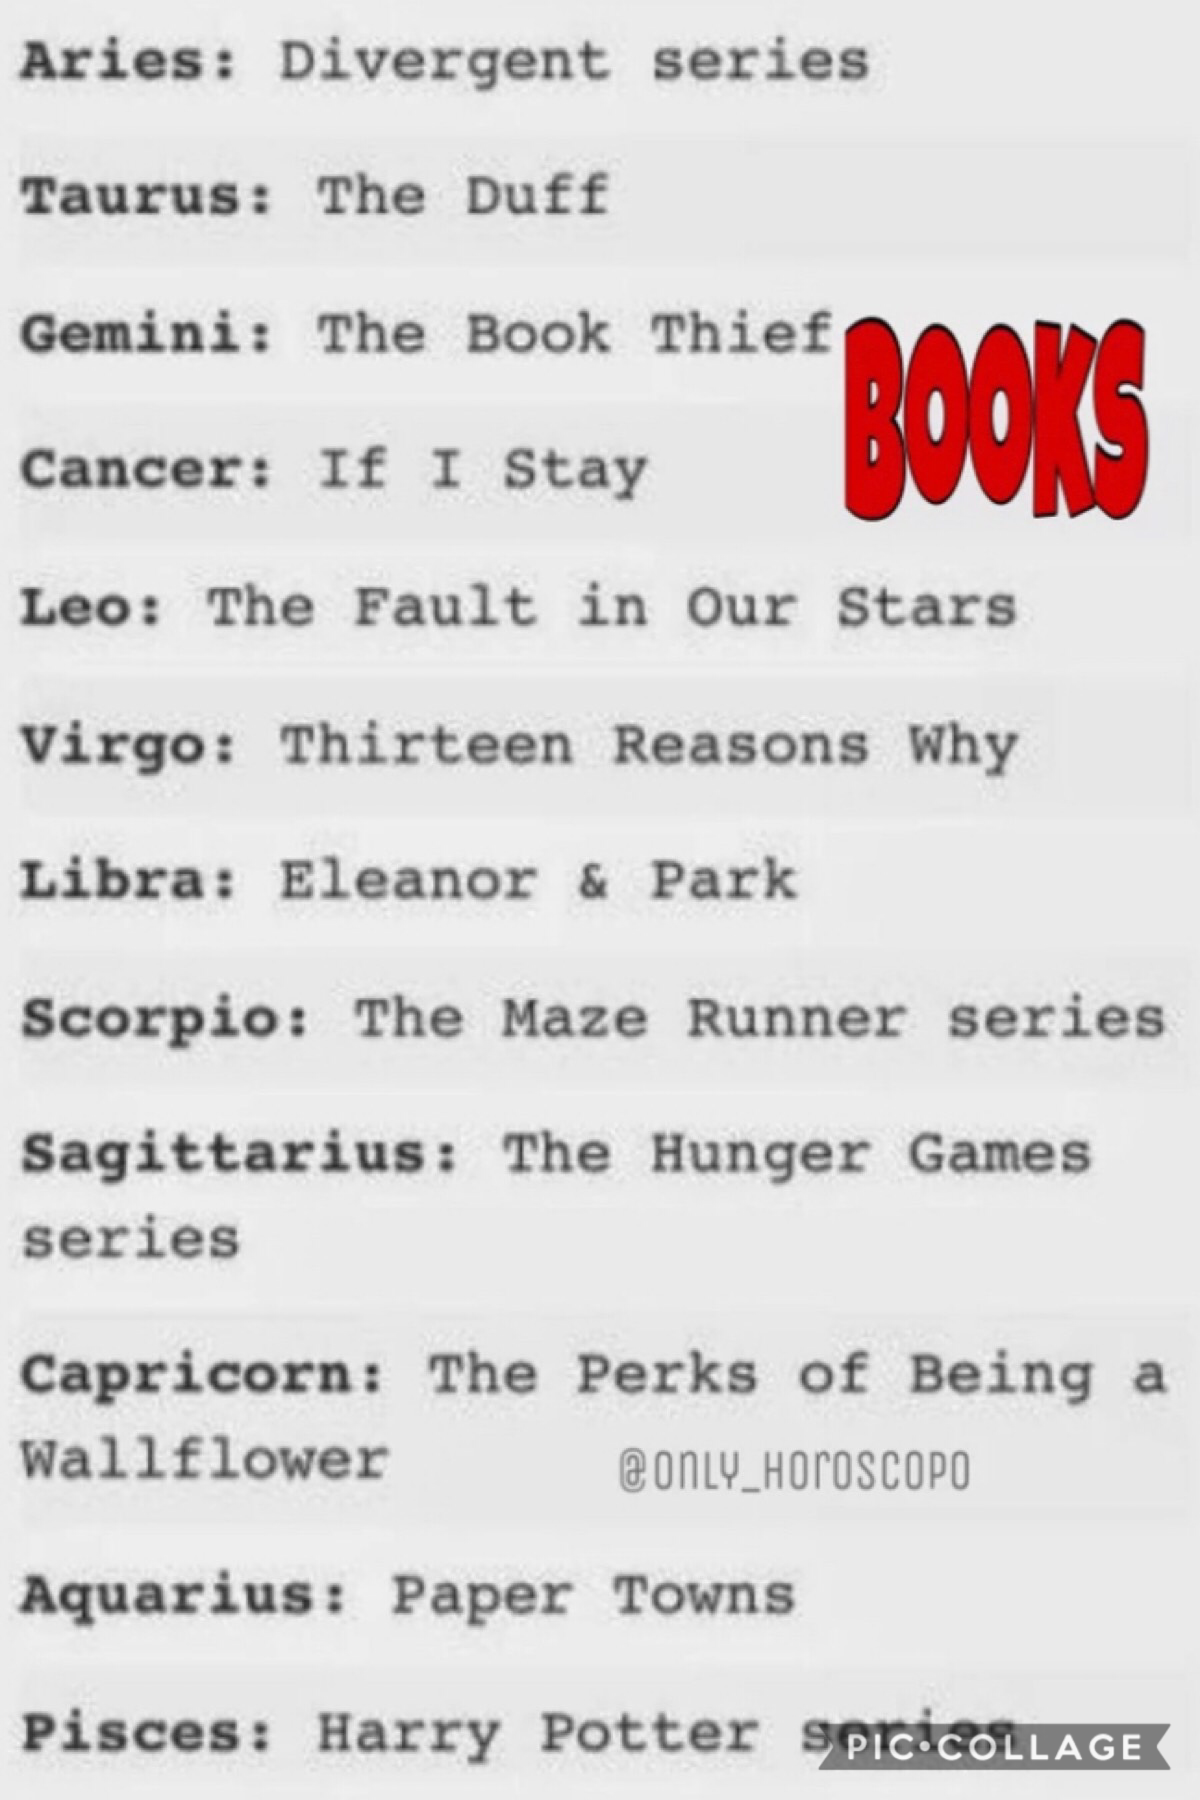 I’m Pisces and I got Harry Potter series💖💖💖